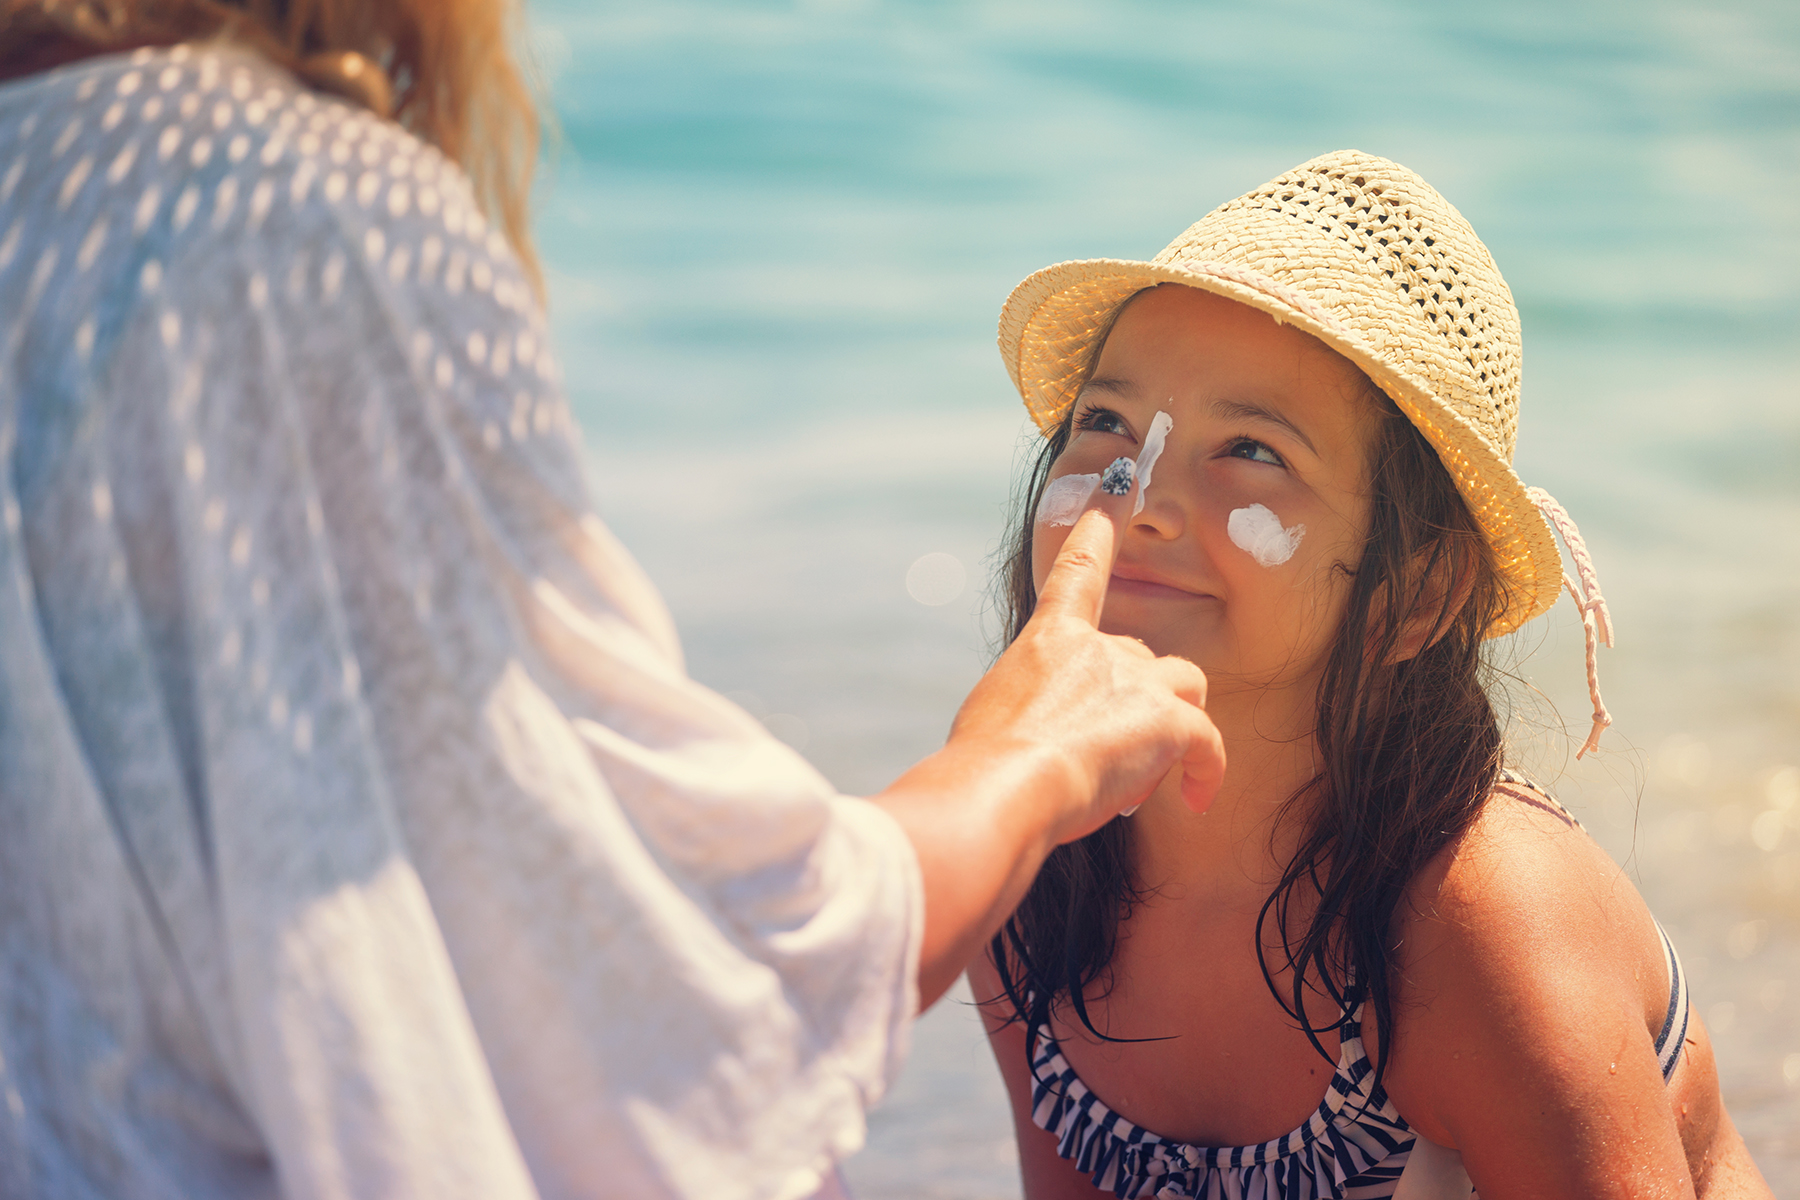 Mom puts sunscreen on daughter's face